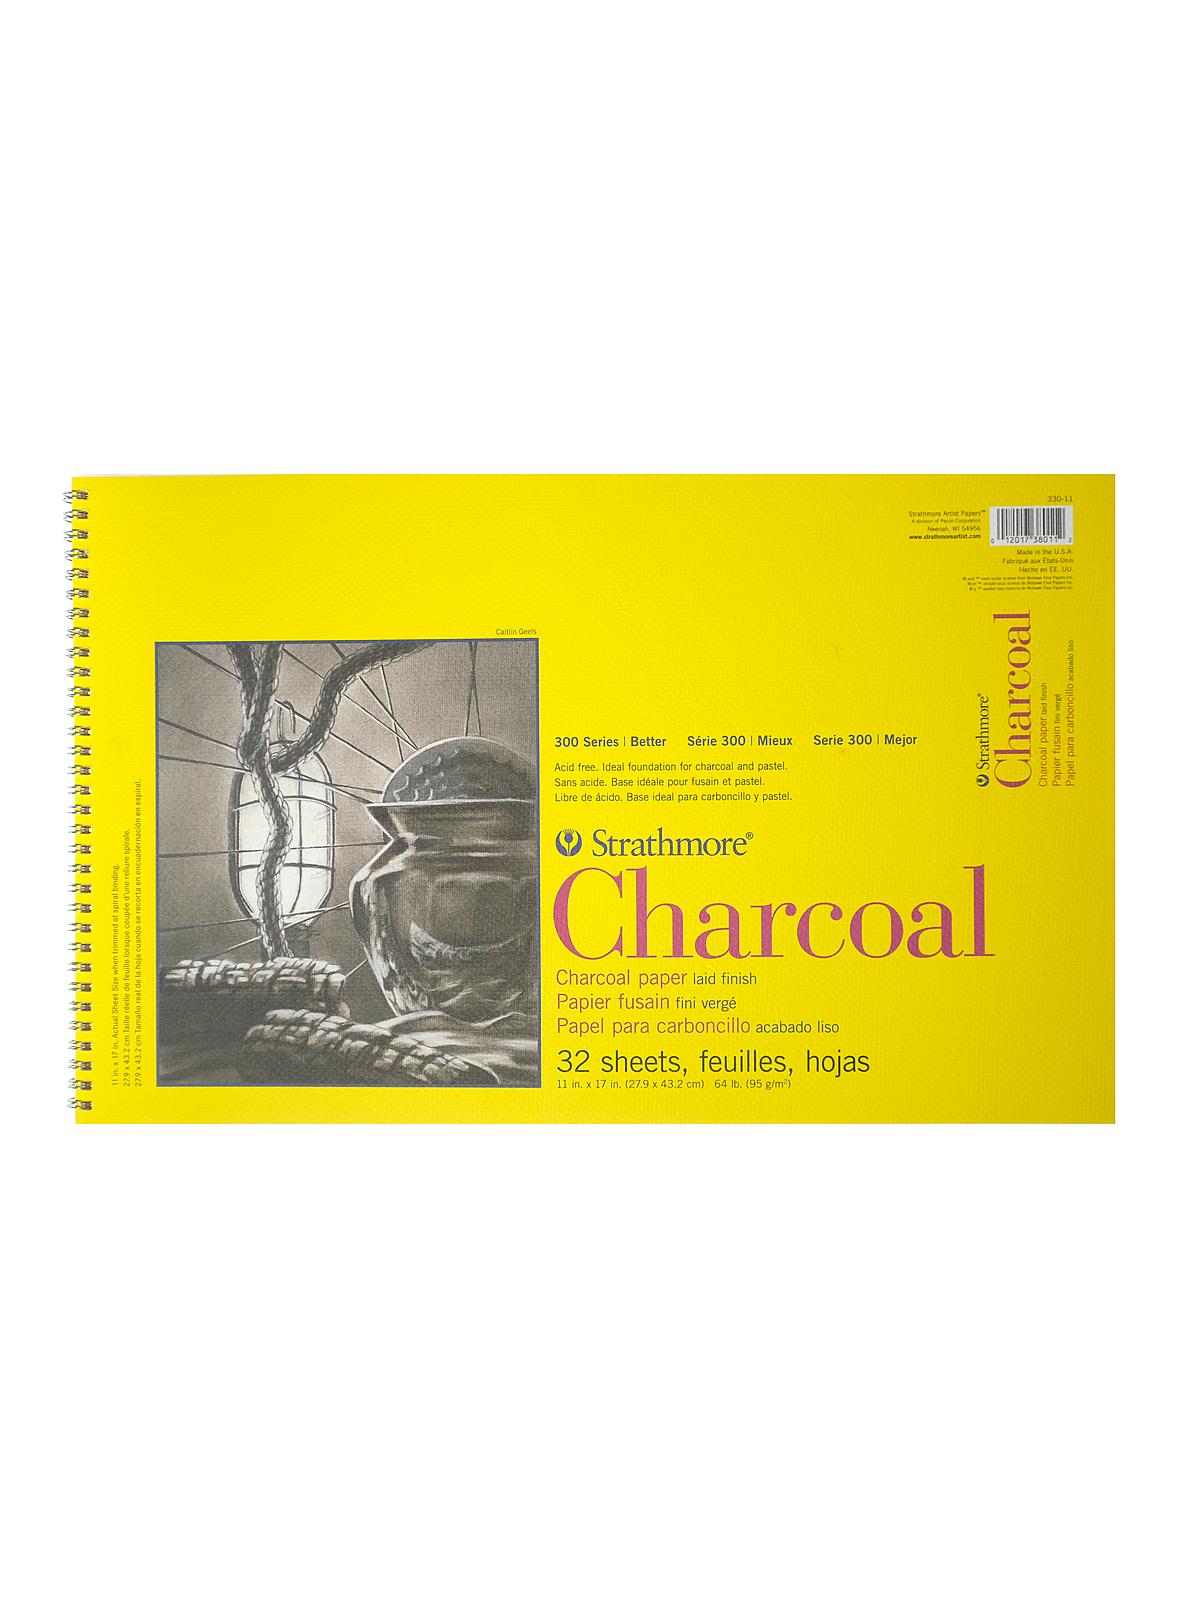 300 Series Charcoal Paper Pads 11 In. X 17 In. 32 Sheets